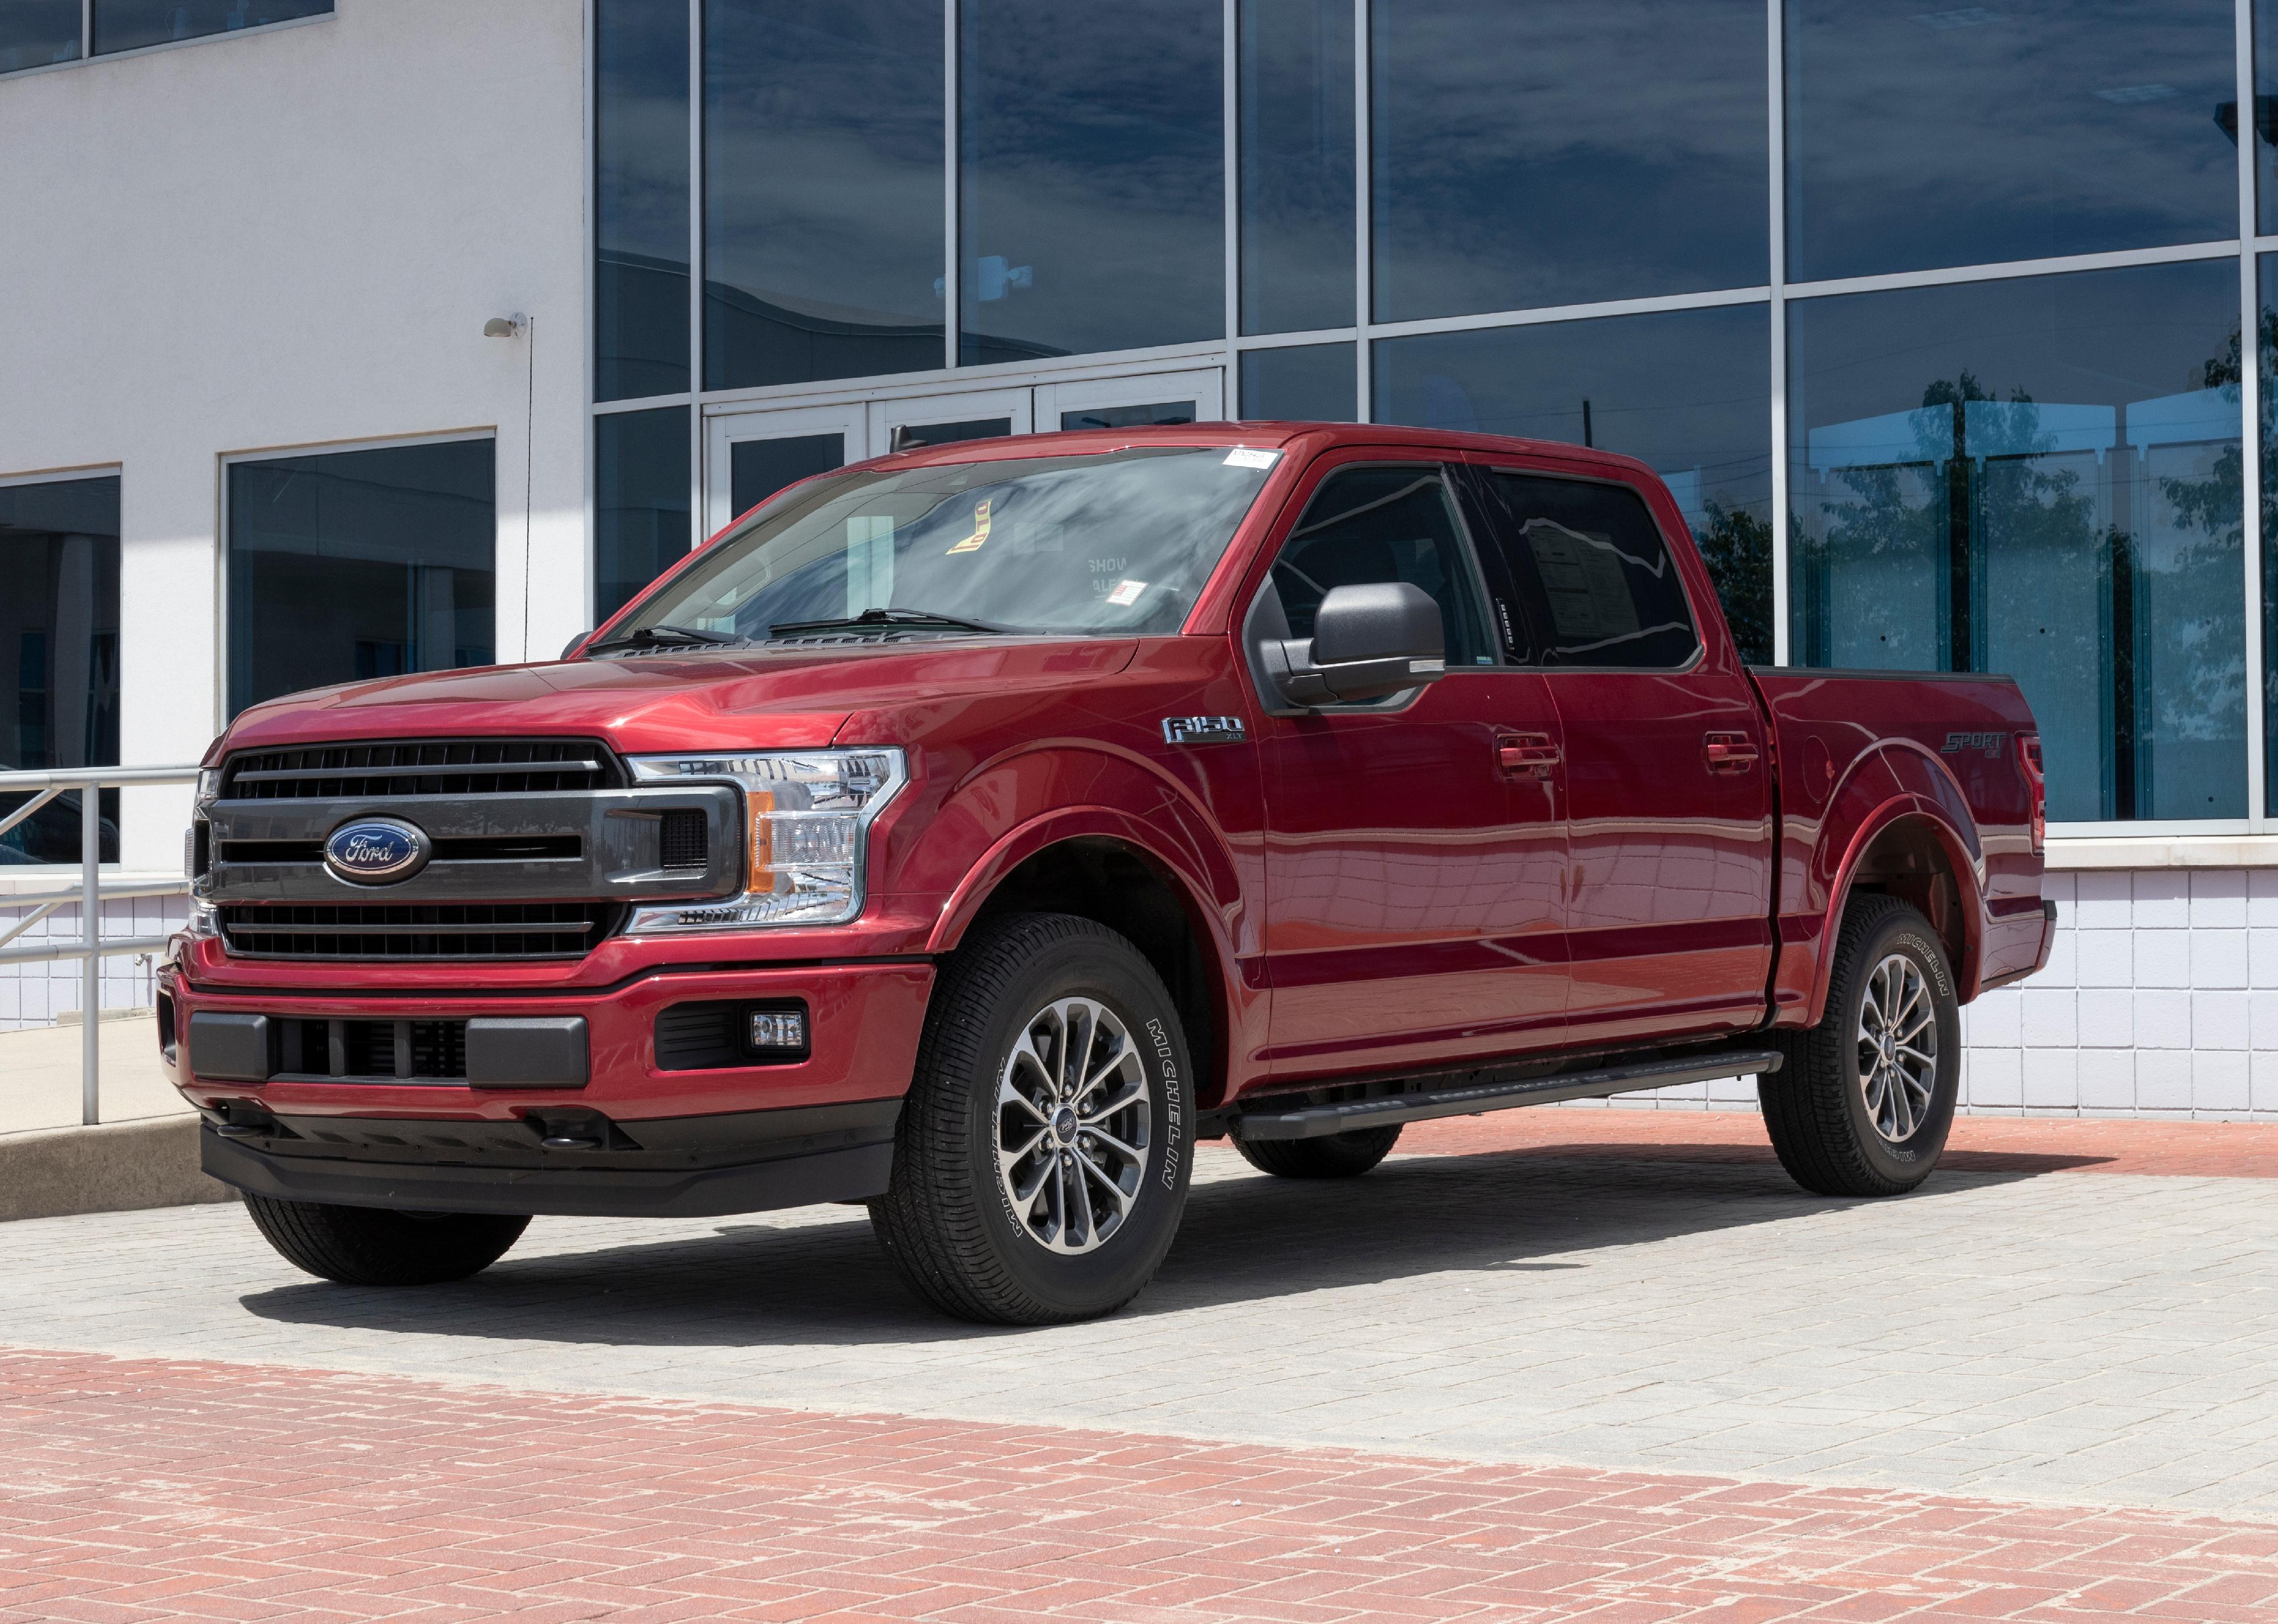 Ford F150 on display at a dealership.